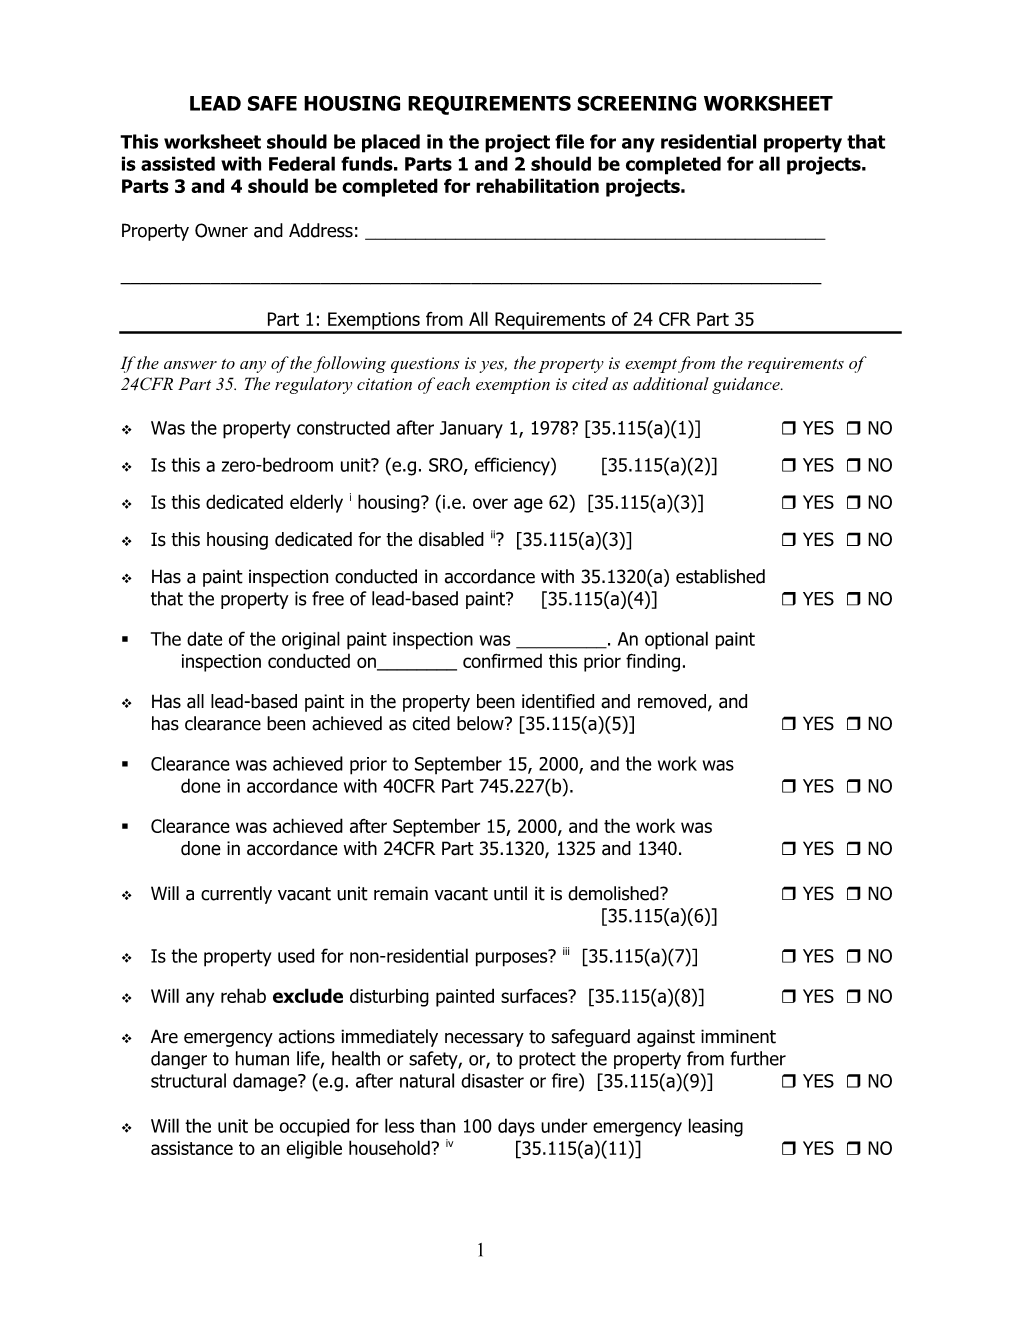 Lead Safe Housing Requirements Screening Worksheet